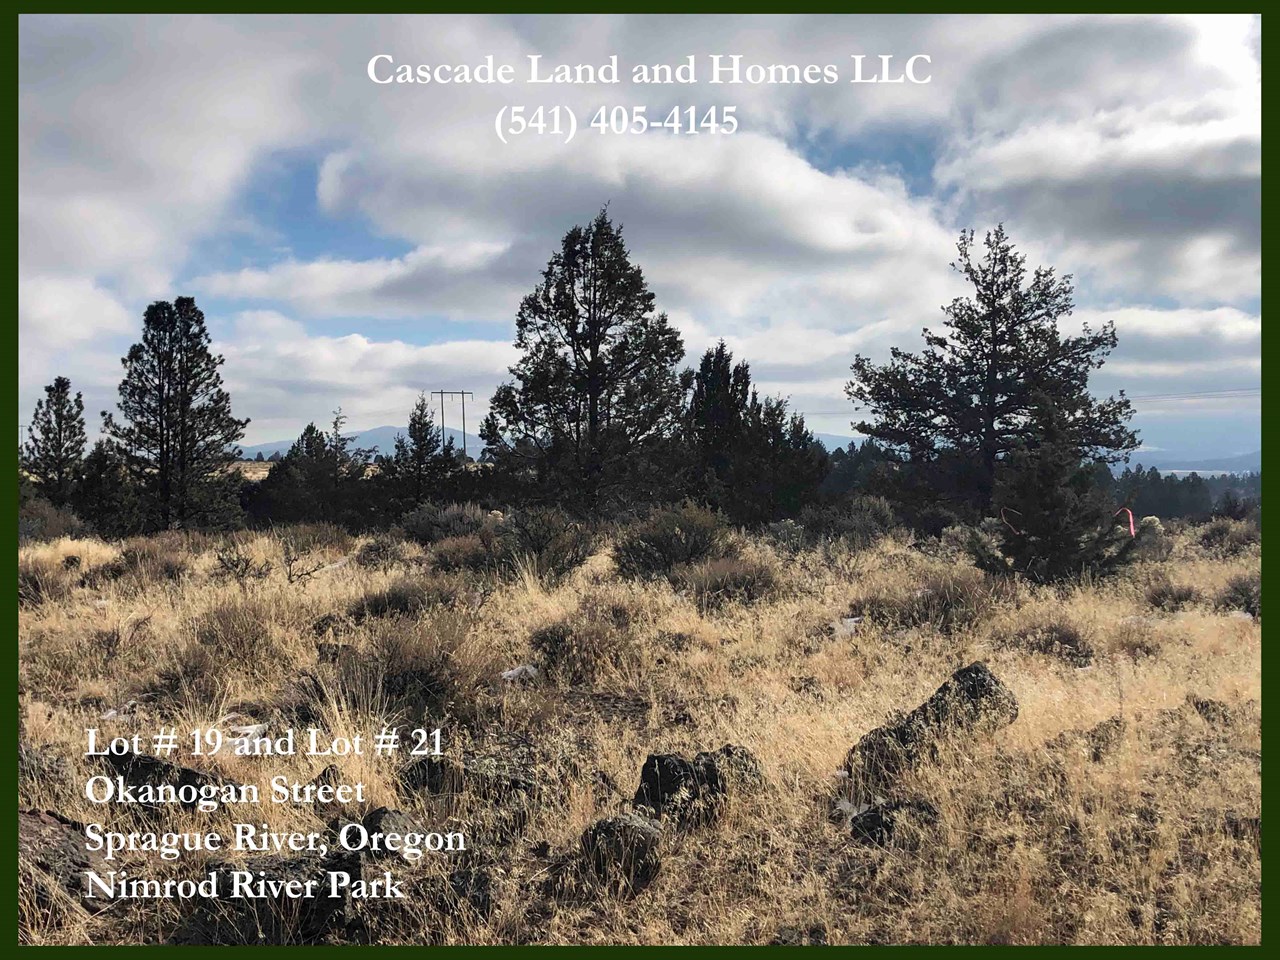 the property is easy to locate. the roads are compacted dirt and gravel. we had no trouble accessing the property without 4wd, although if you are out exploring the nearby area, it might be a good idea. look for our signs!